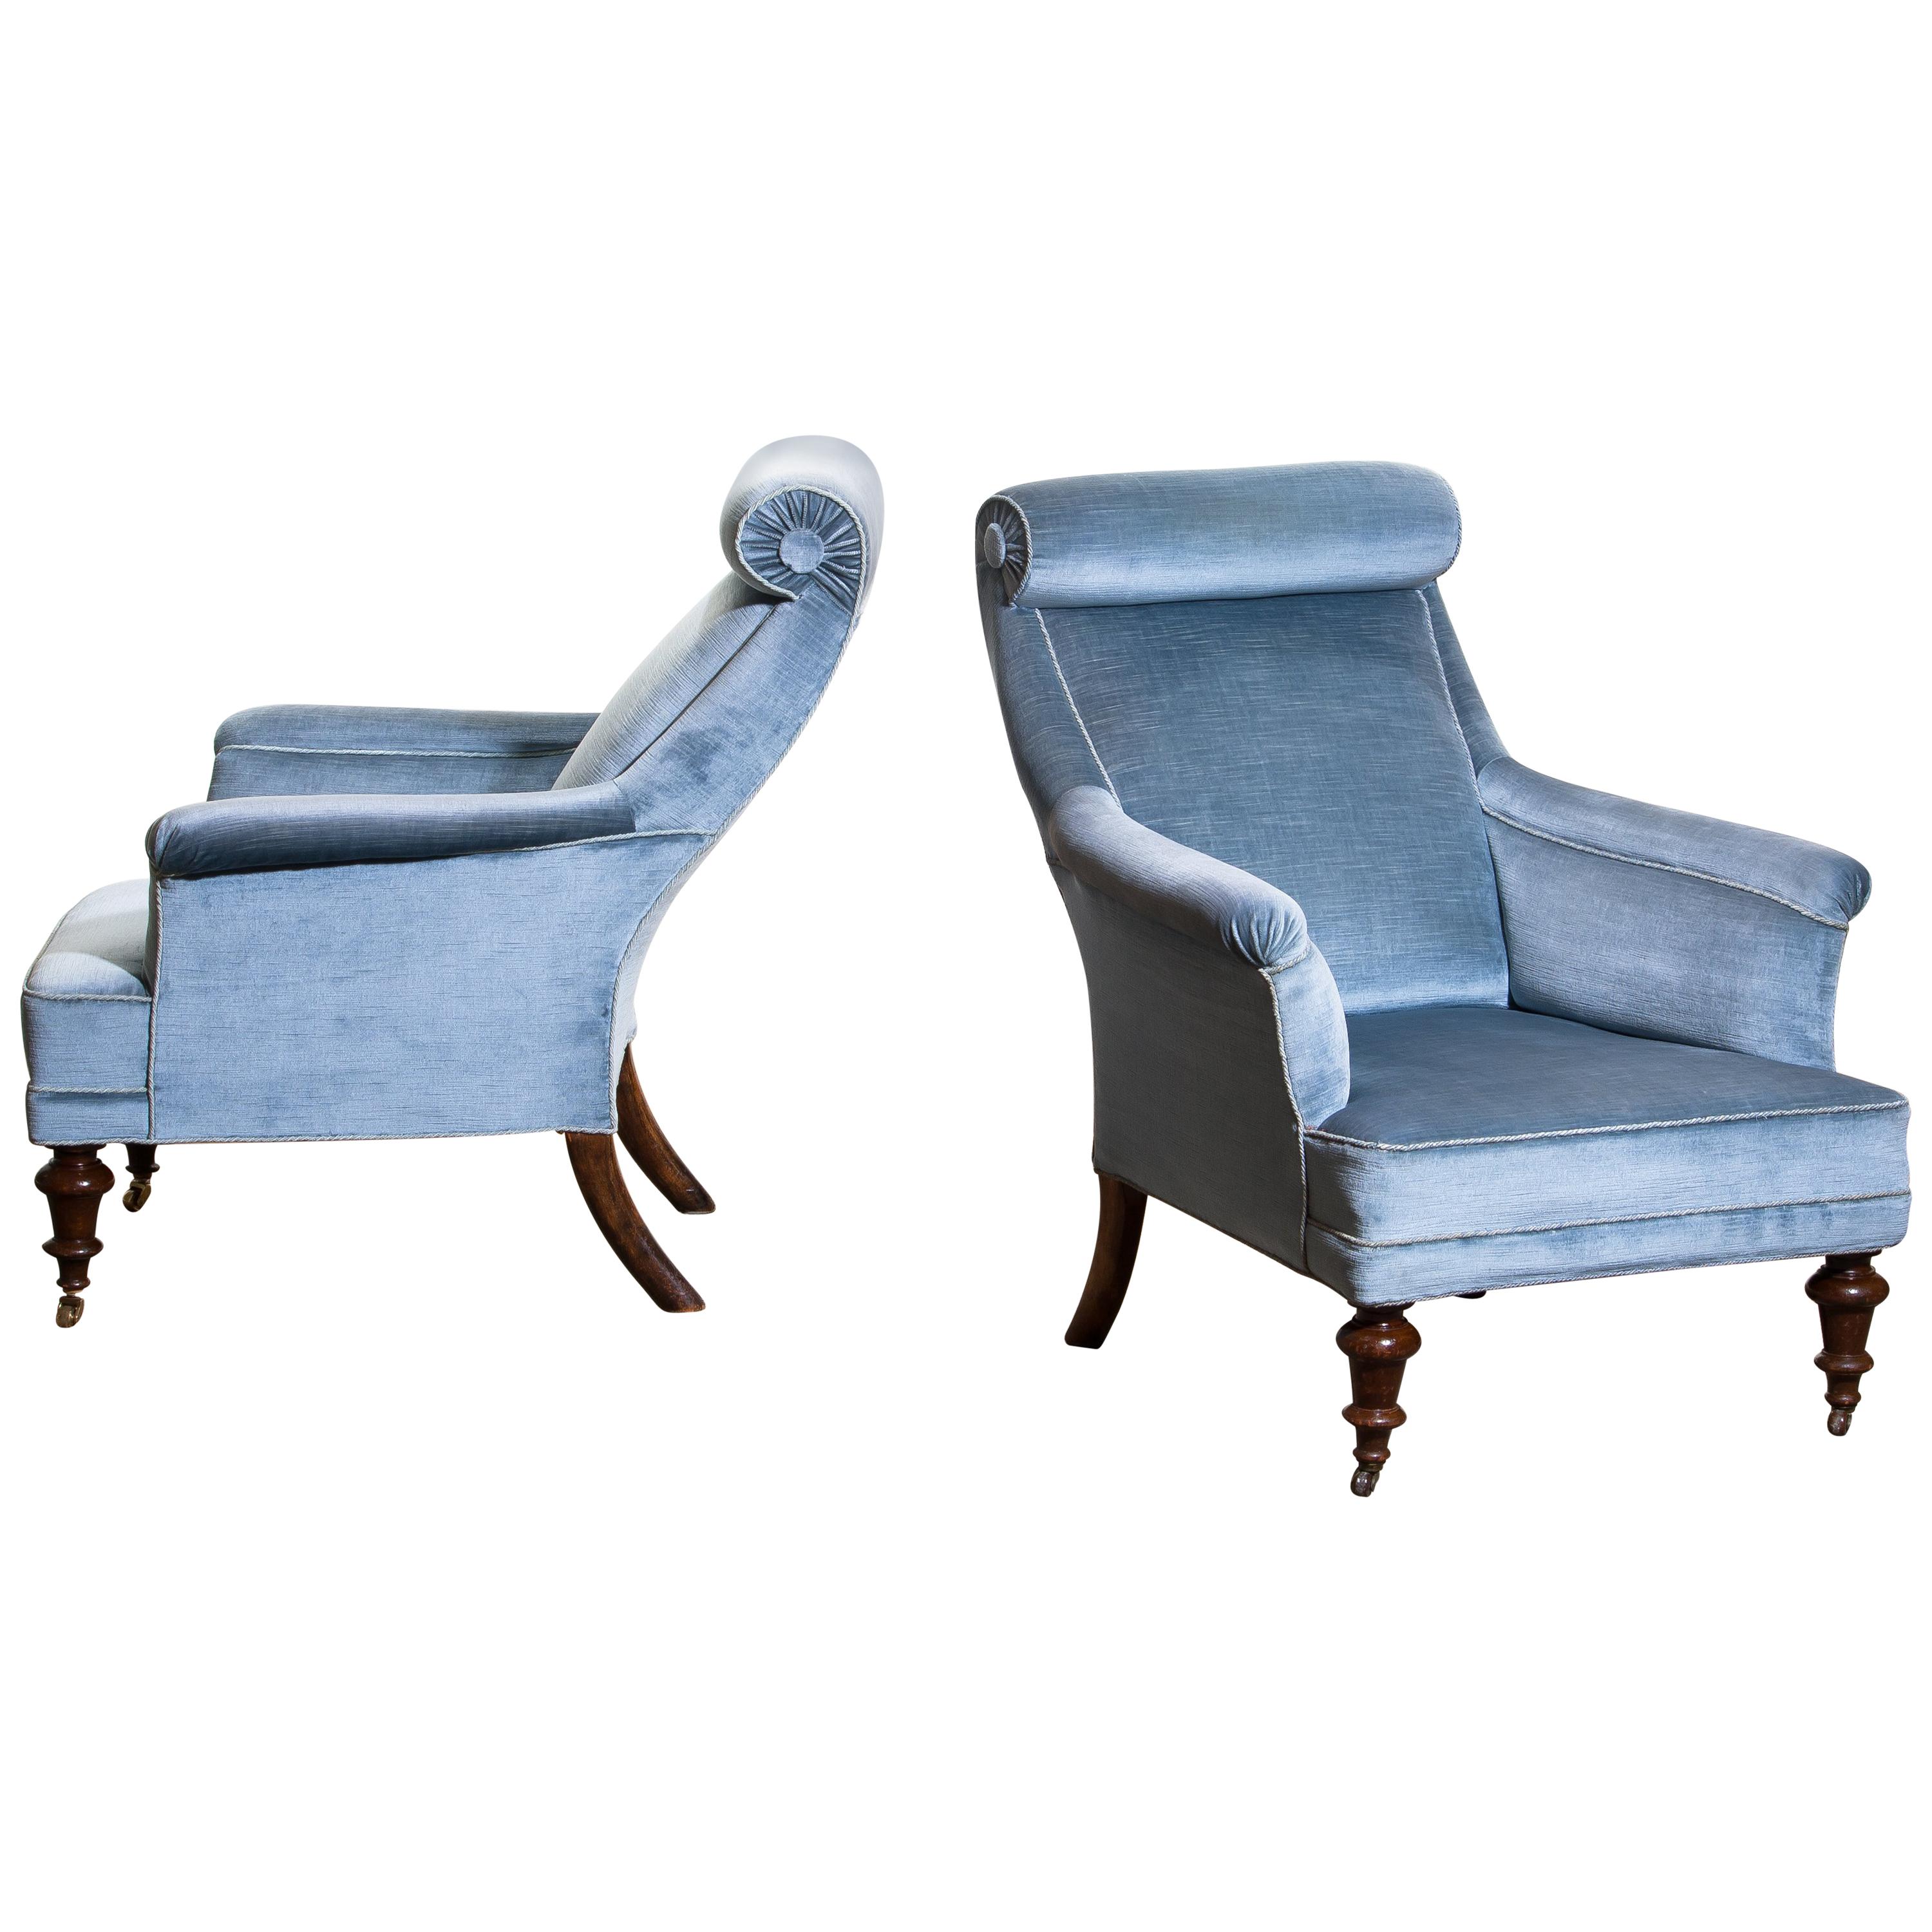 Early 20th Century 1900s Set of Two Ice Blue Velvet Dorothy Draper Style Bergère / Lounge Chairs